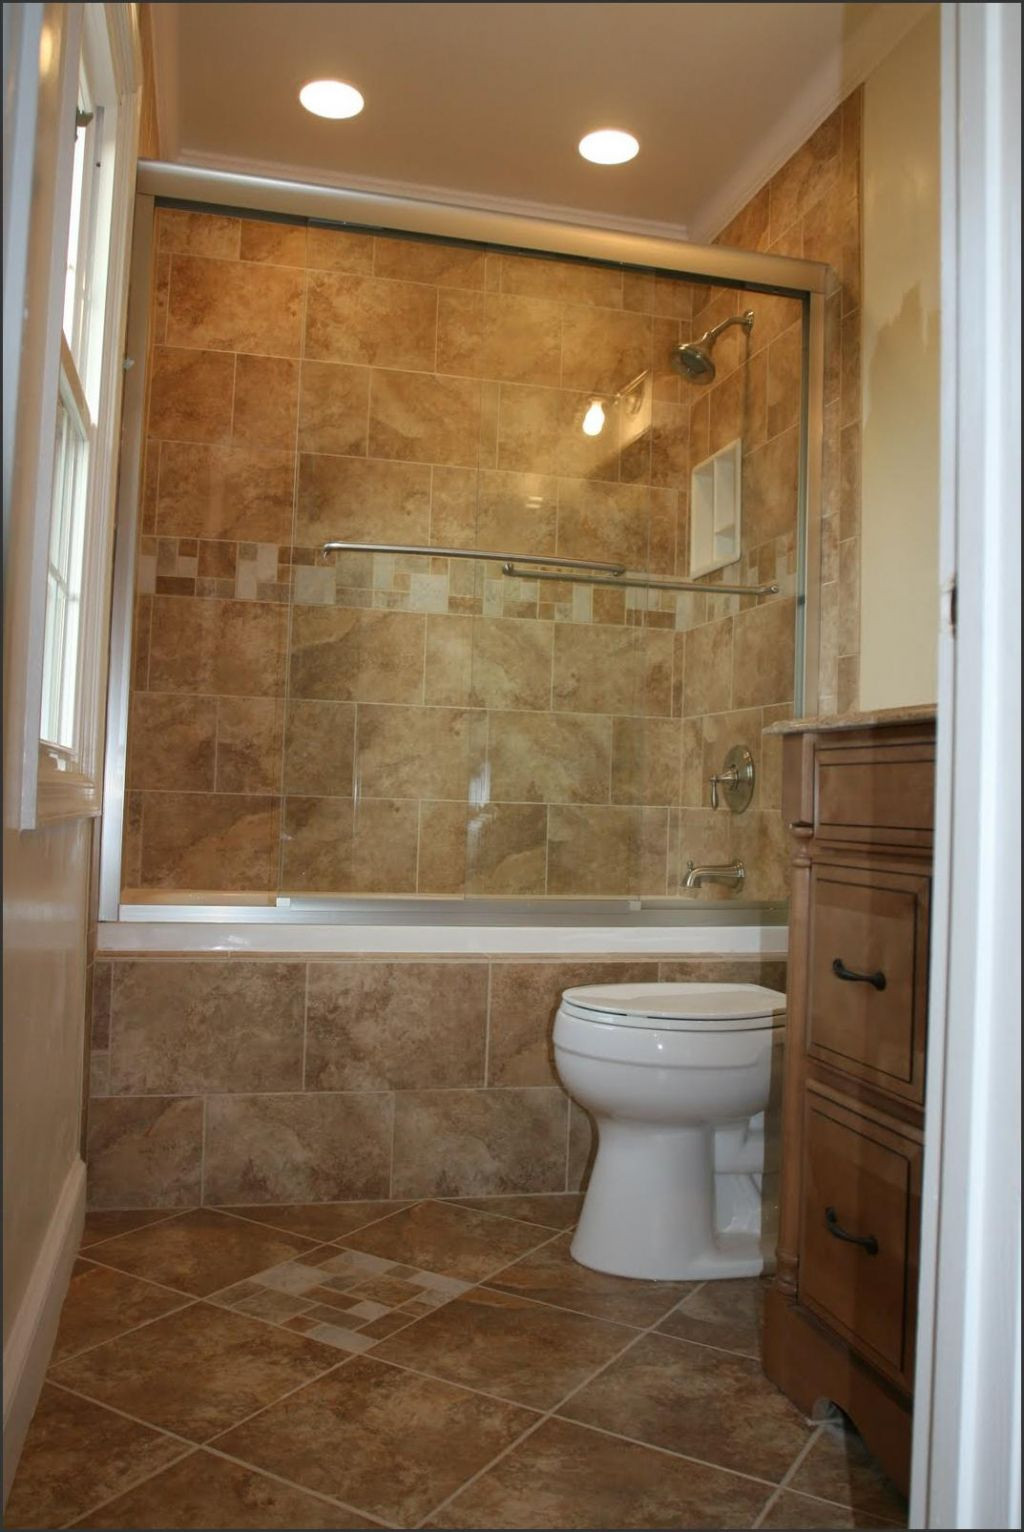 Bathroom Tub Shower Ideas
 Tile Shower Ideas Affecting the Appearance of the Space